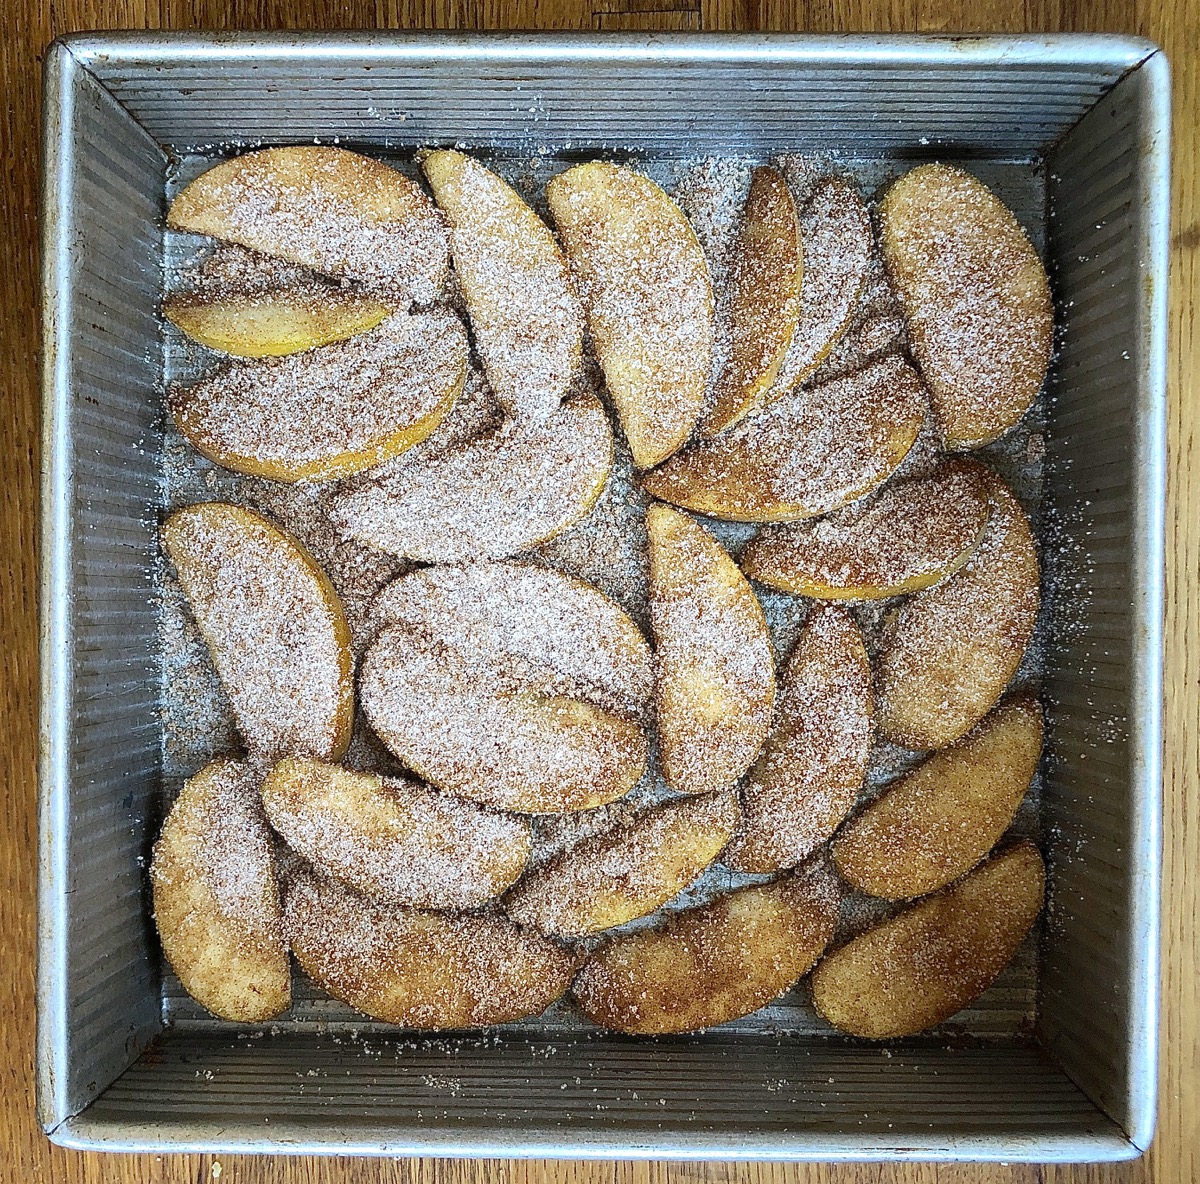 Apple slices tossed with cinnamon and sugar, arranged in the bottom of a 9" square pan